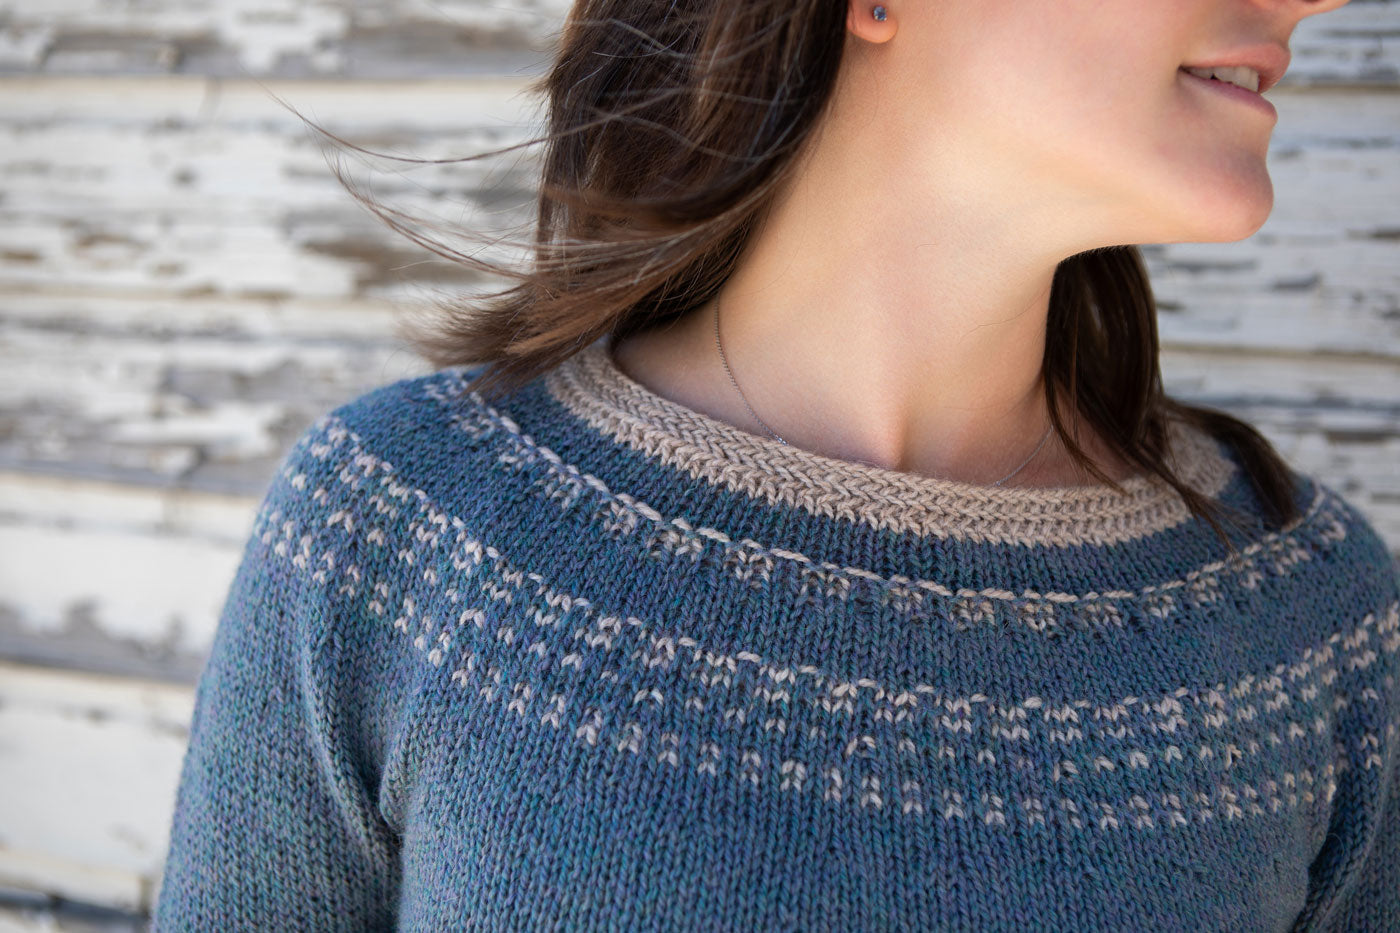 This is a close up shot of the the colorwork details on the yoke of the sweater